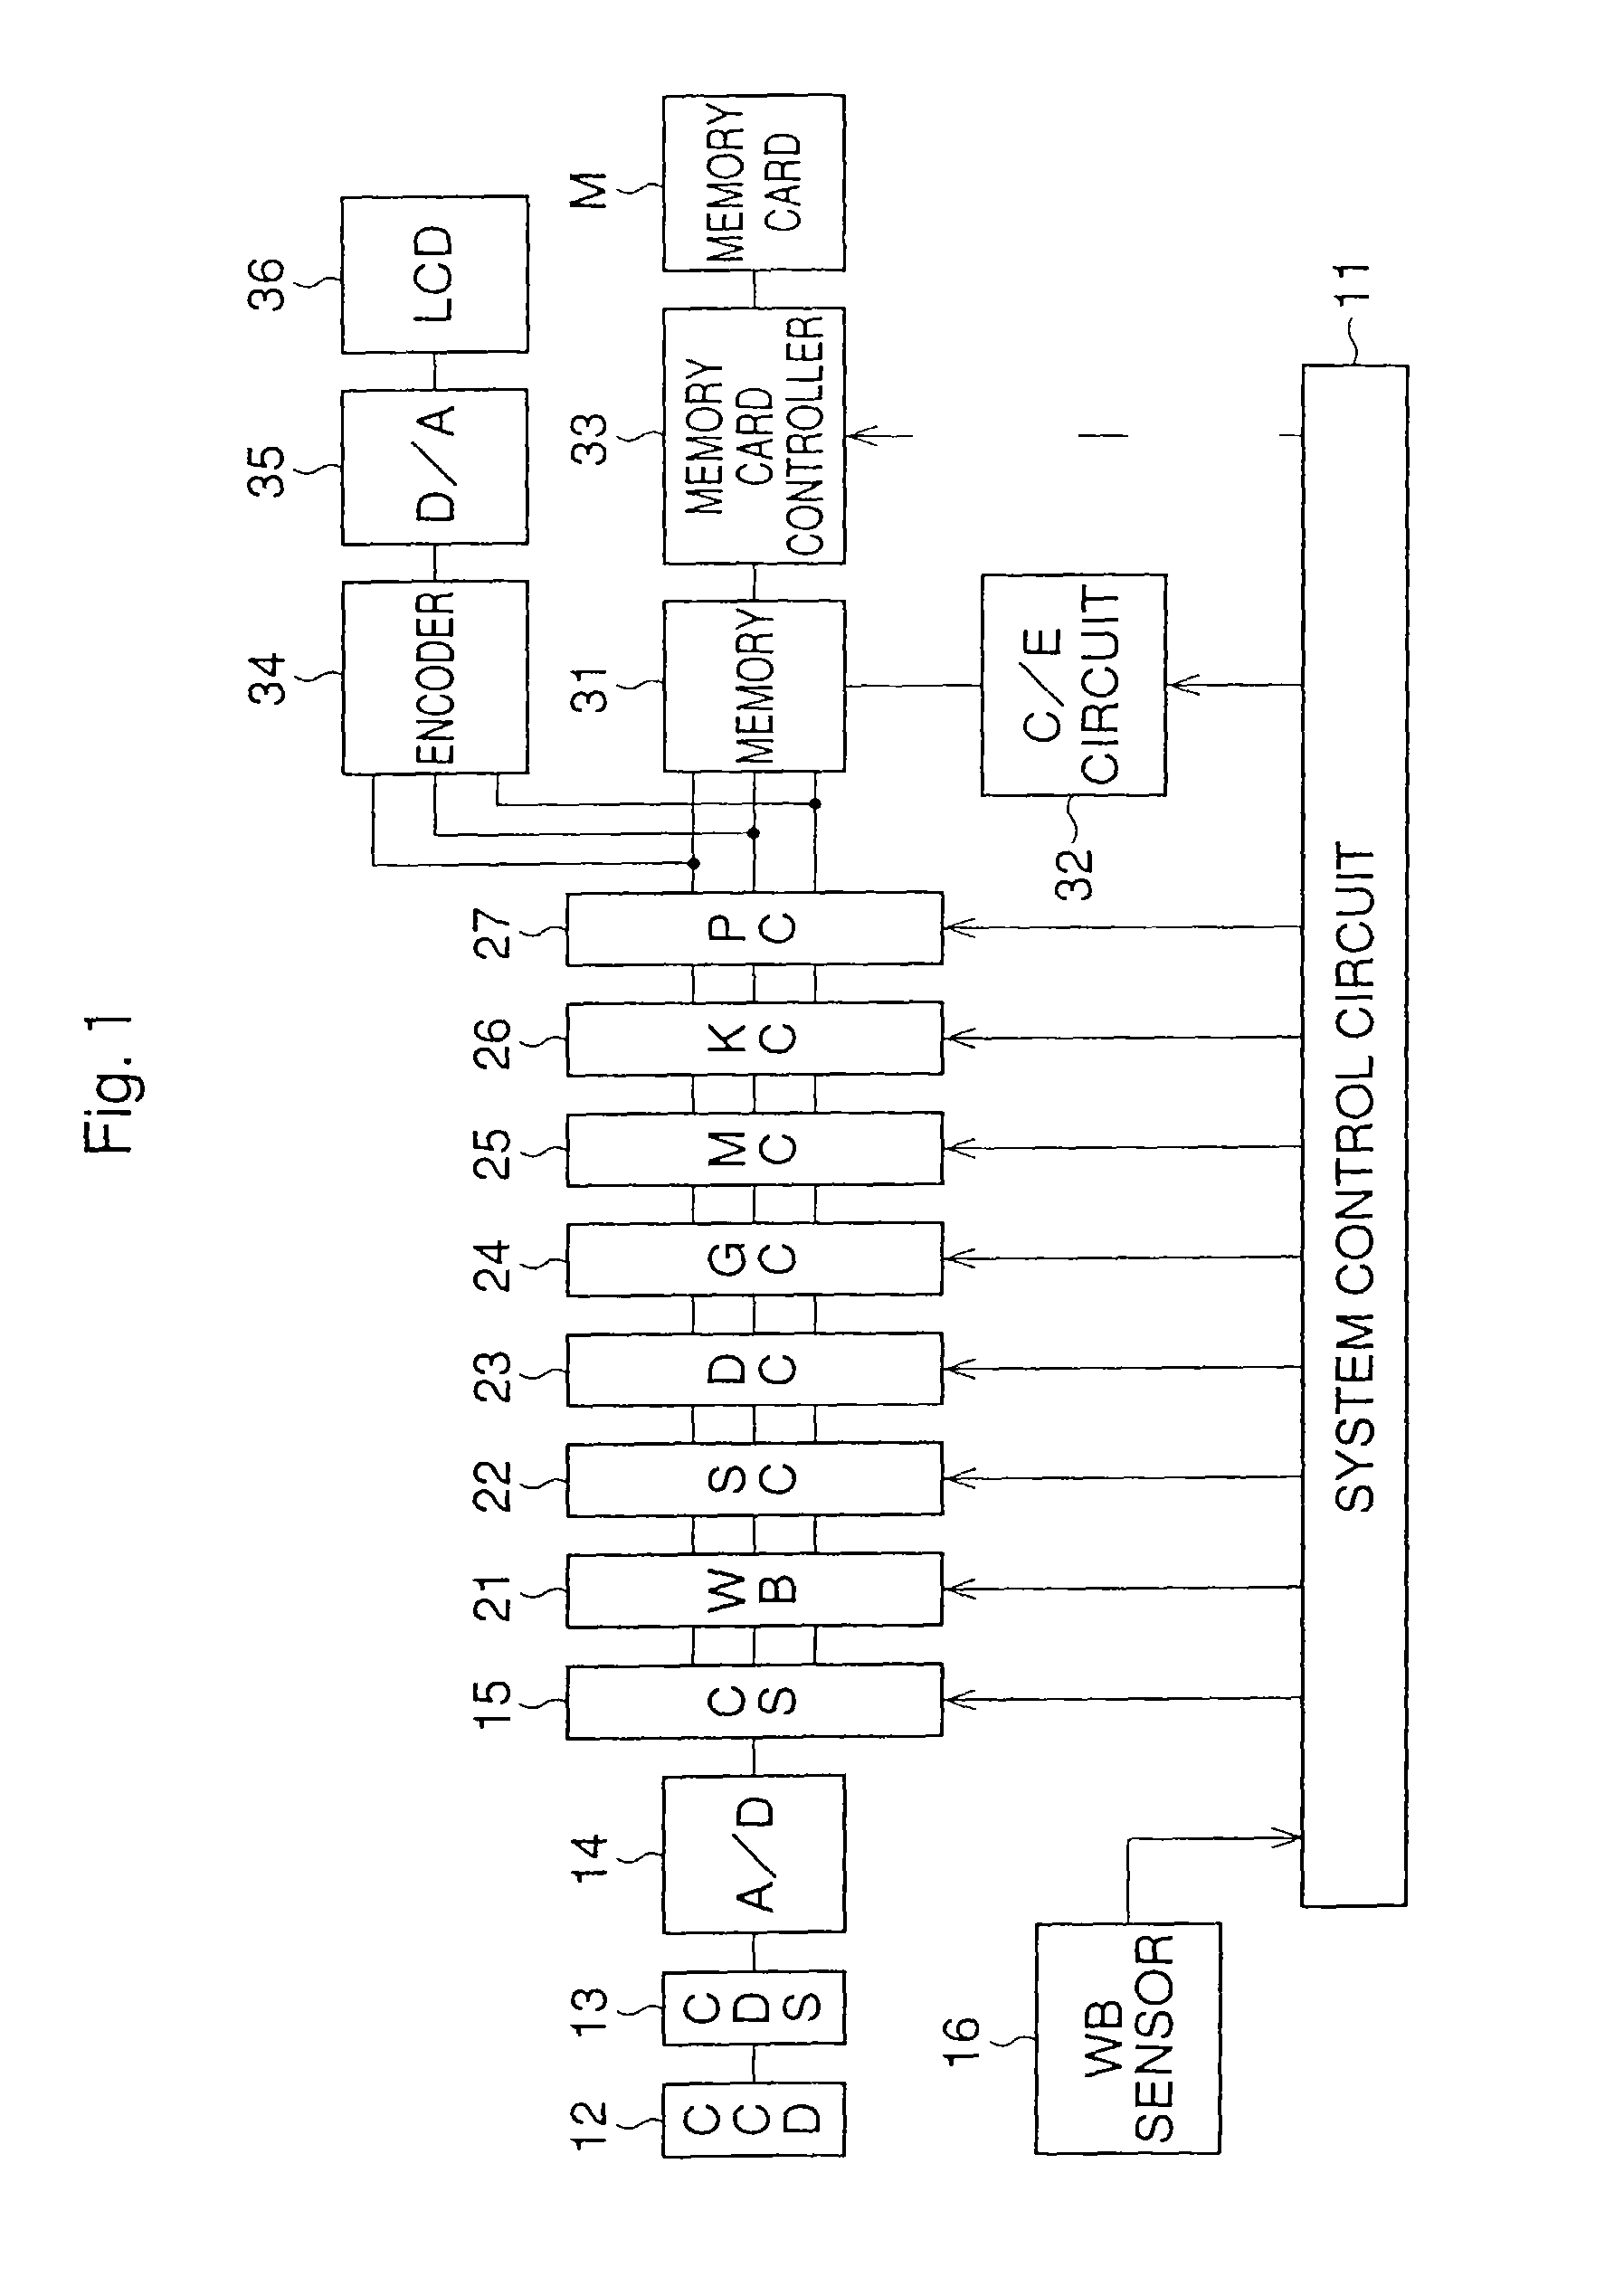 Image correction processing device